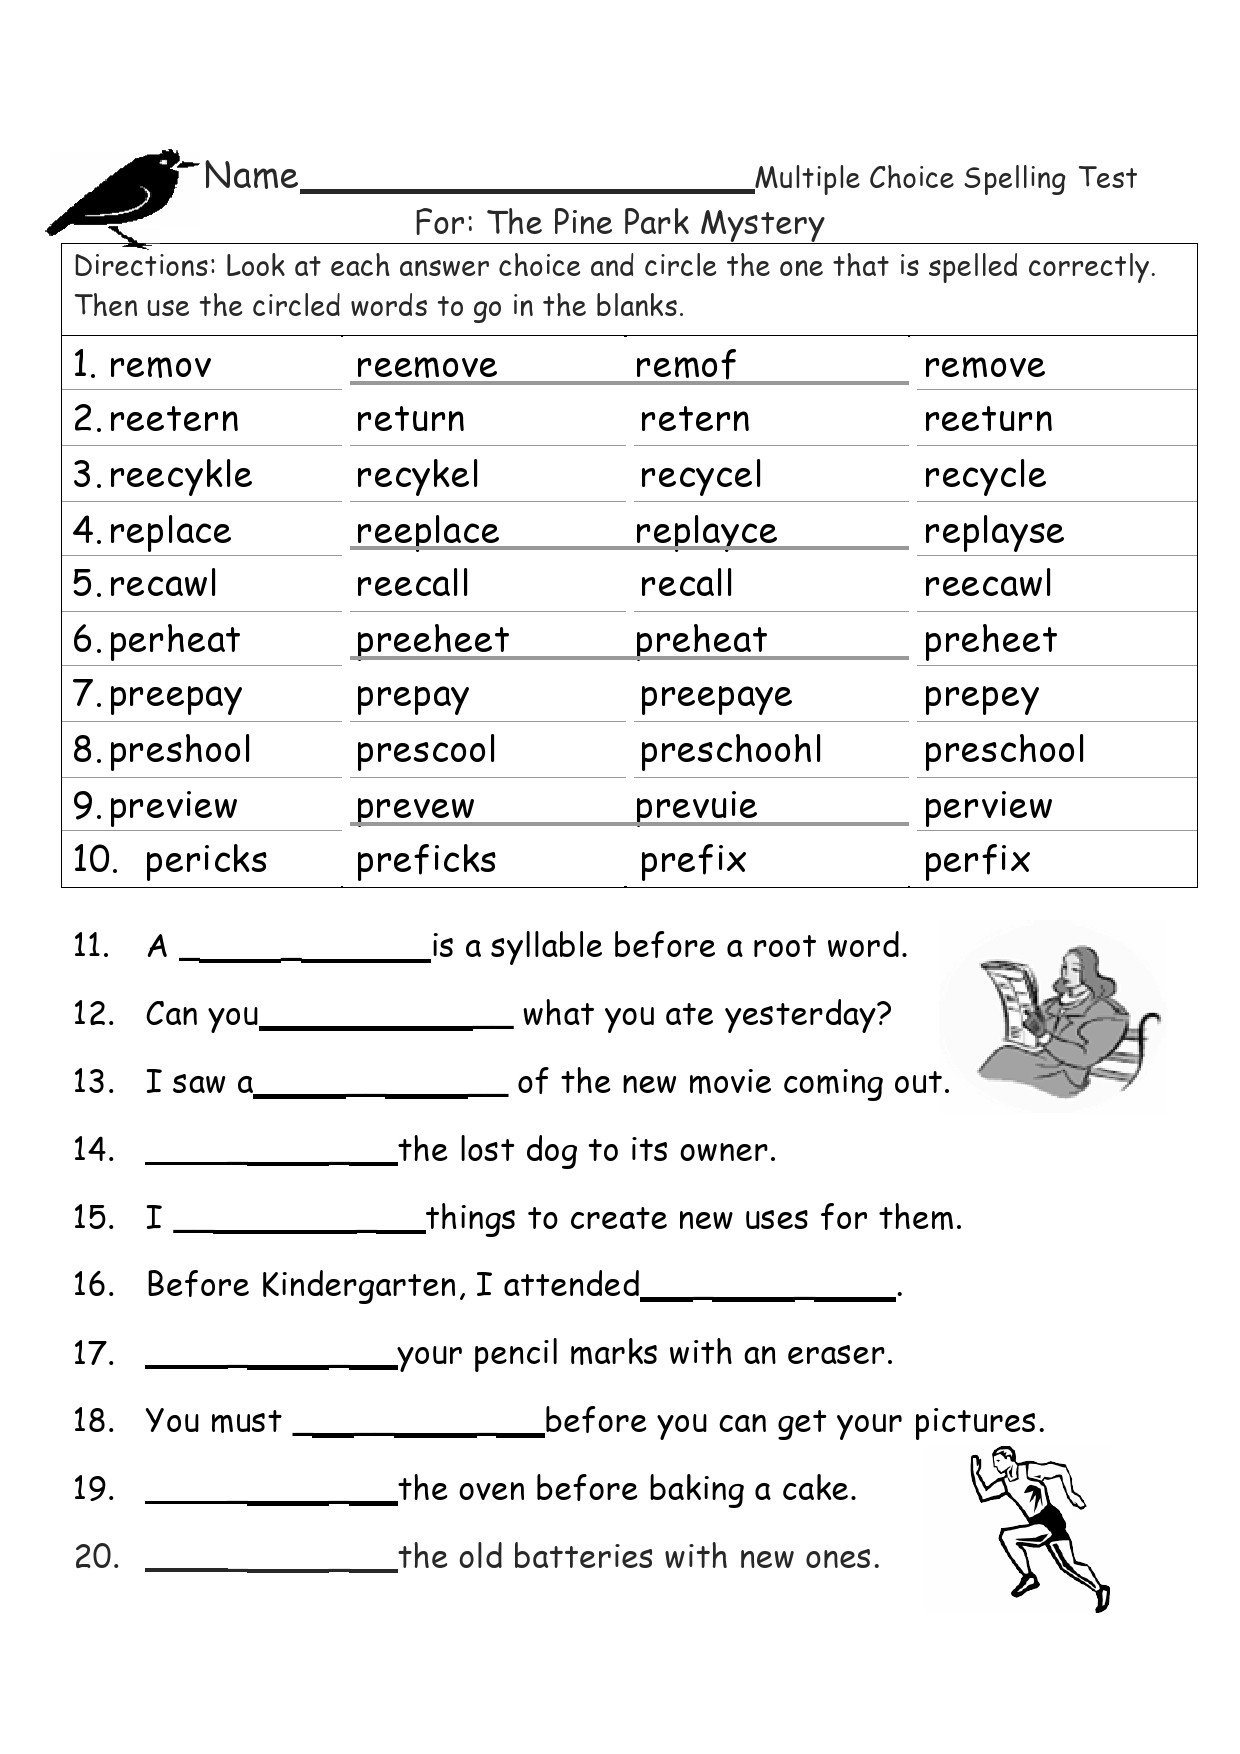 Free spelling test template 36